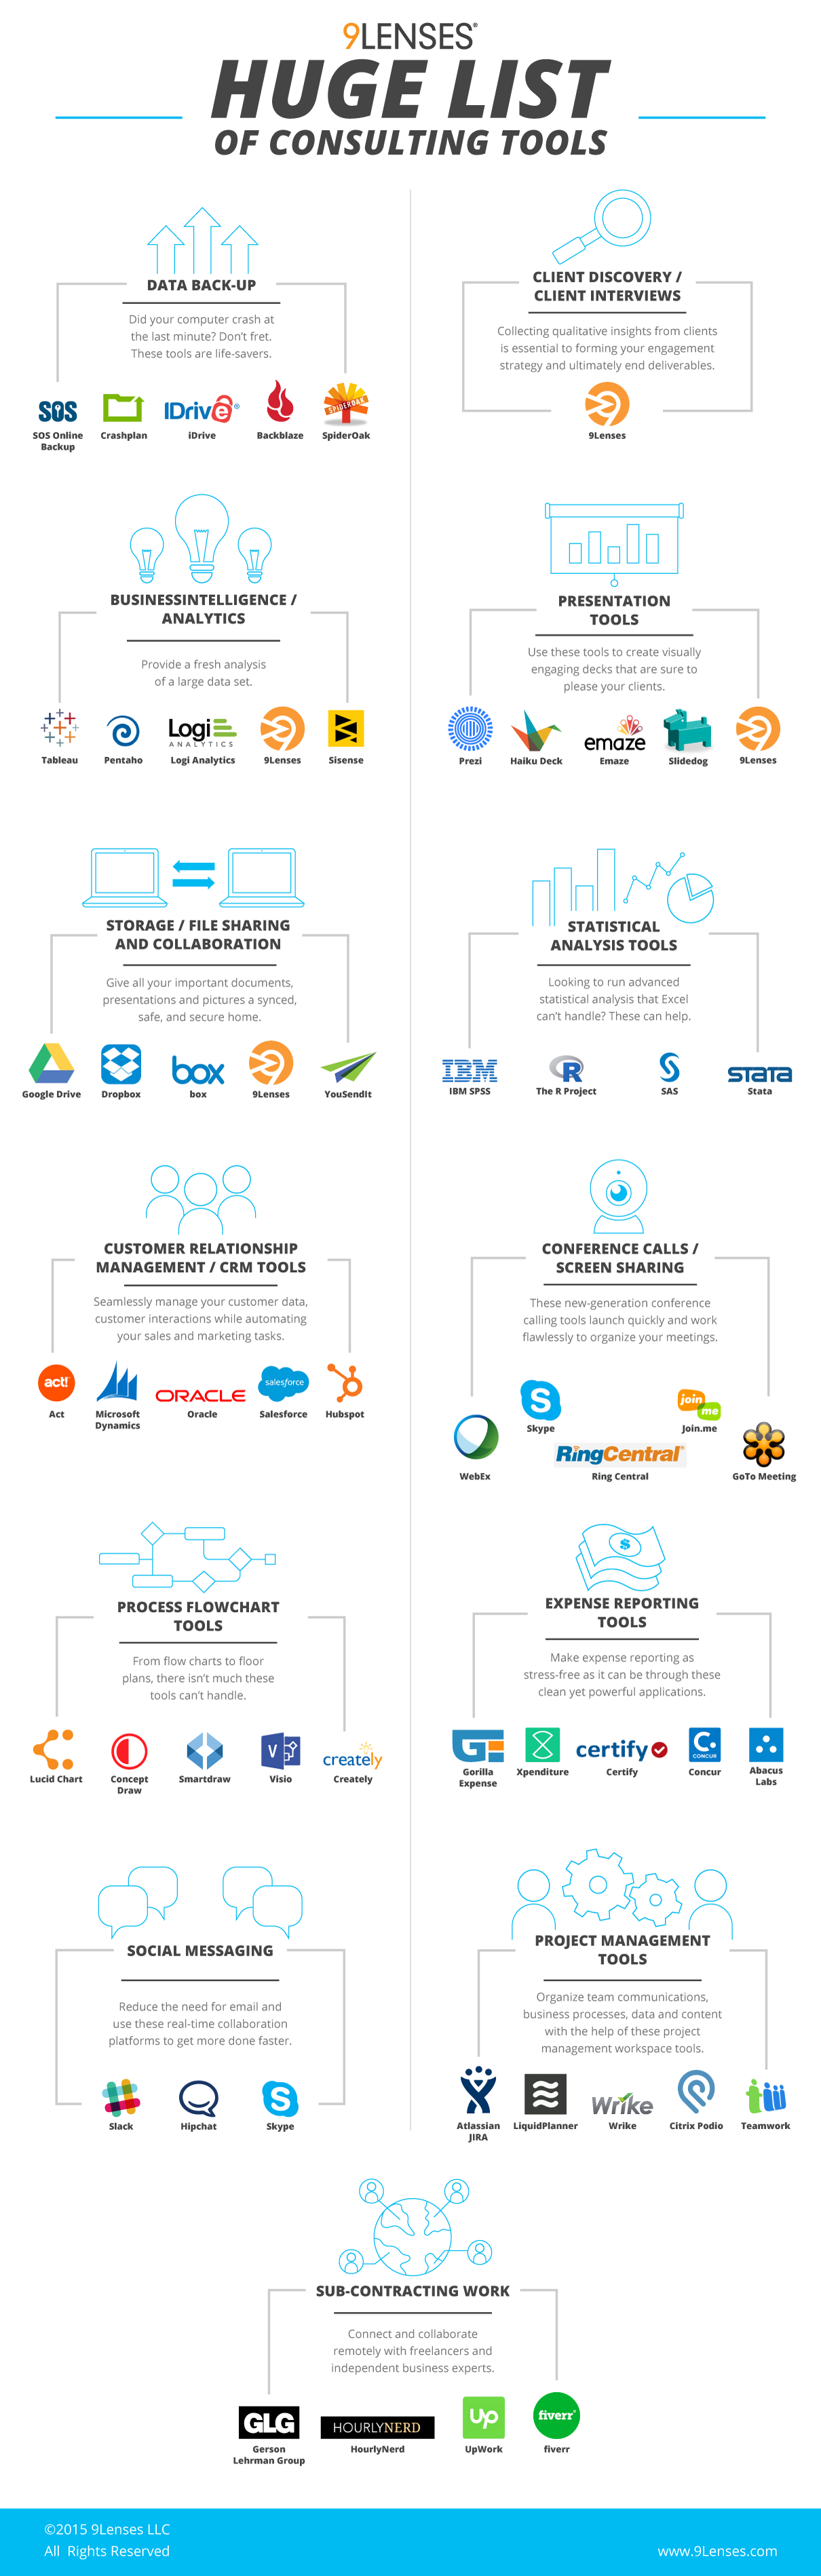 Infographic for list of top consulting tools